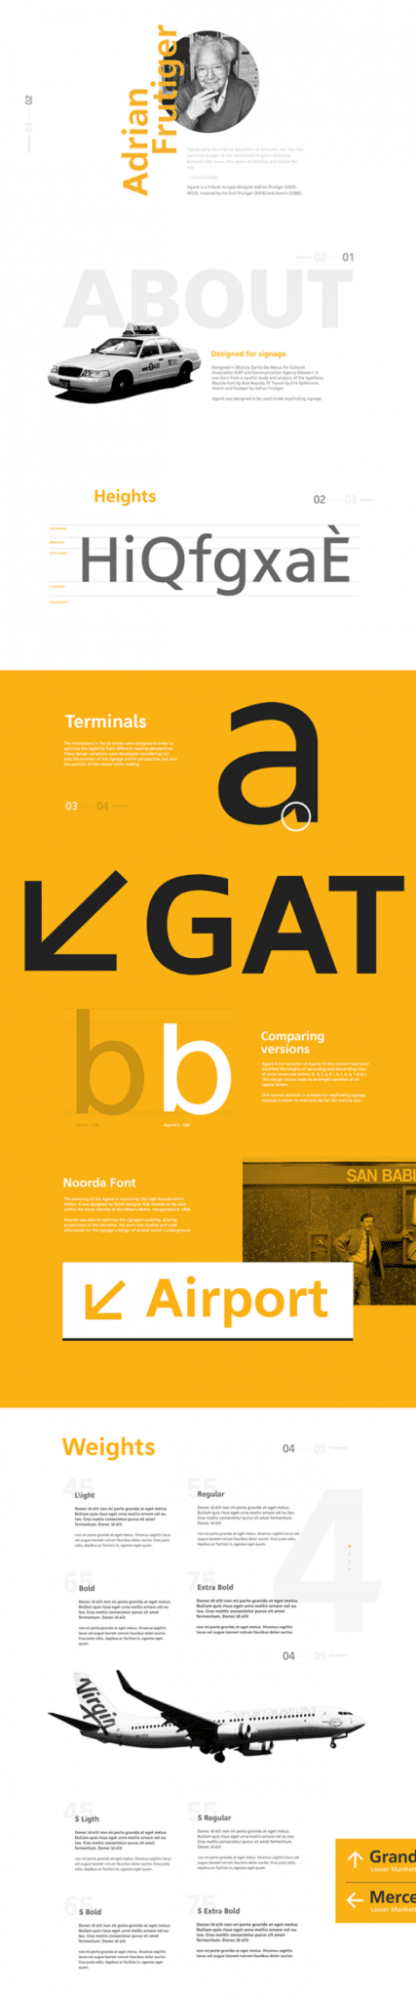 Aganè Font A Free Typeface Designed For UIs